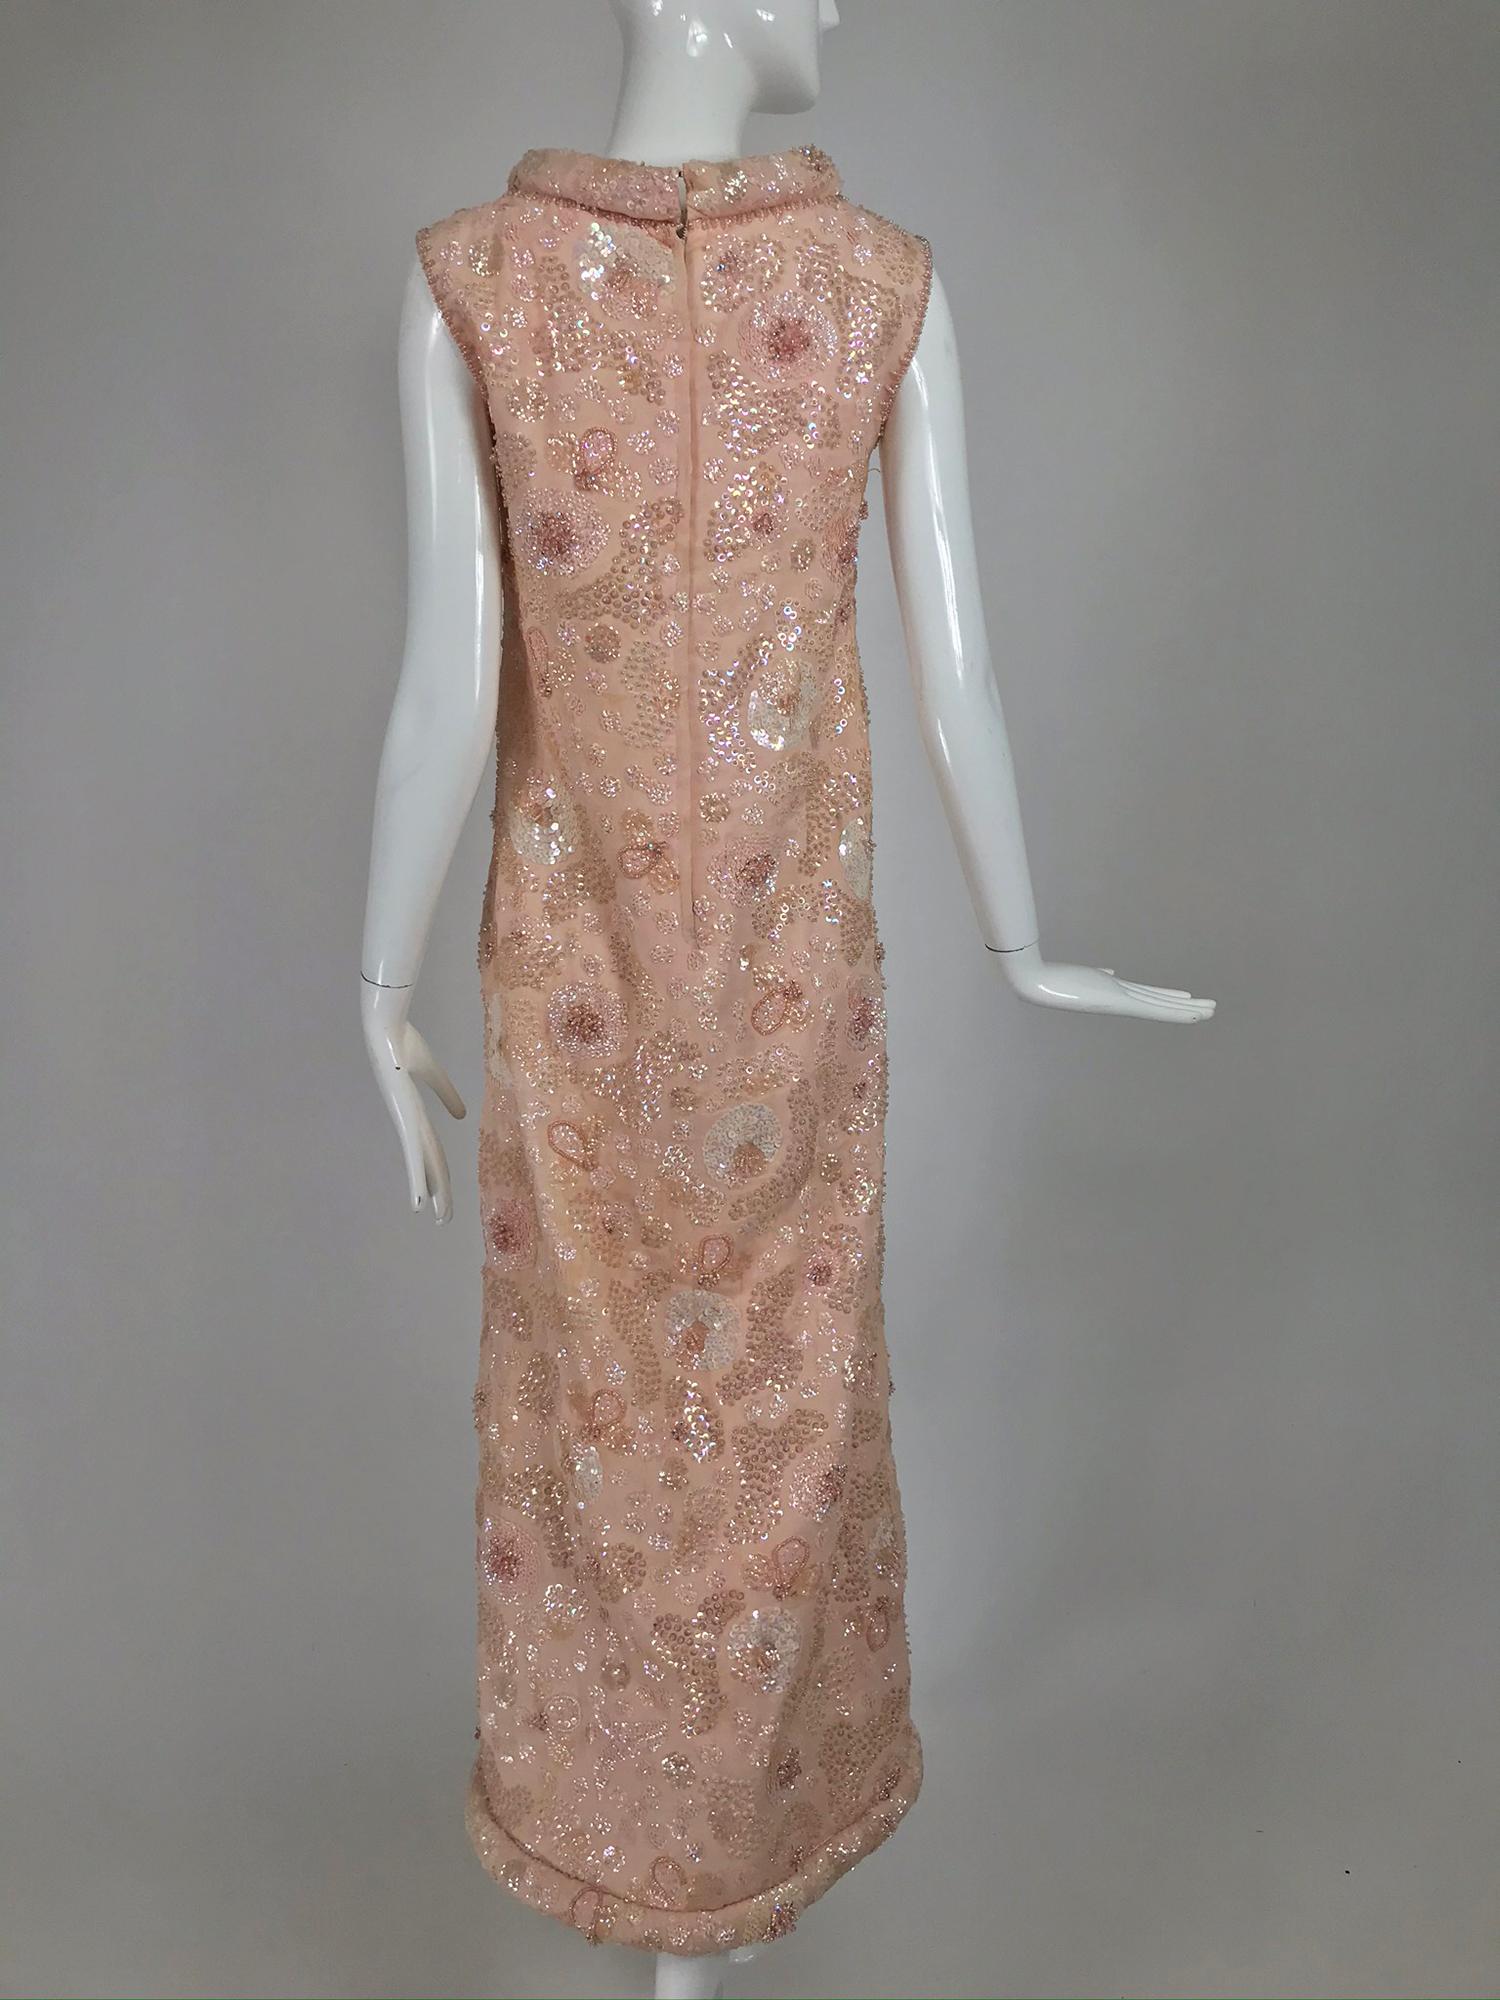 Vintage Bonwit Teller Pale Pink Beaded Sequin Demi Couture Gown 1960s 2